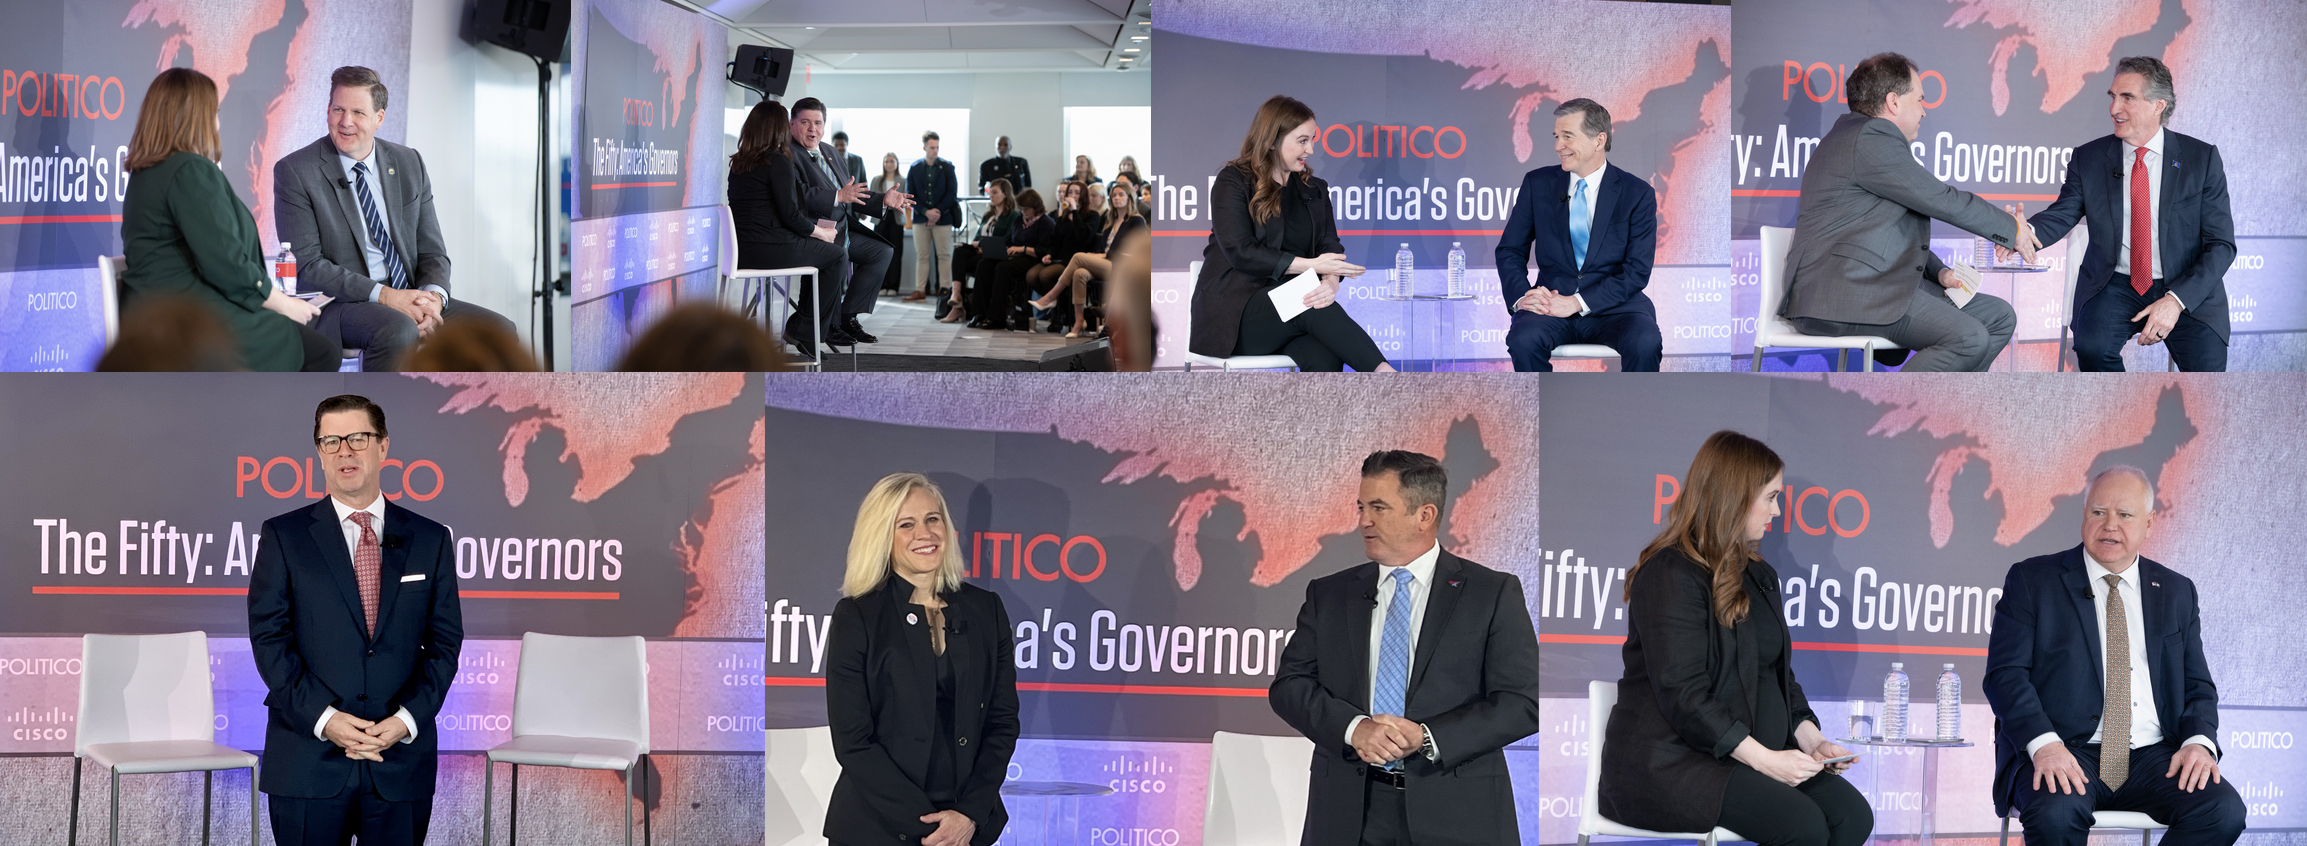 POLITICO The Fifty America's Governors Sponsored by Cisco Speakers